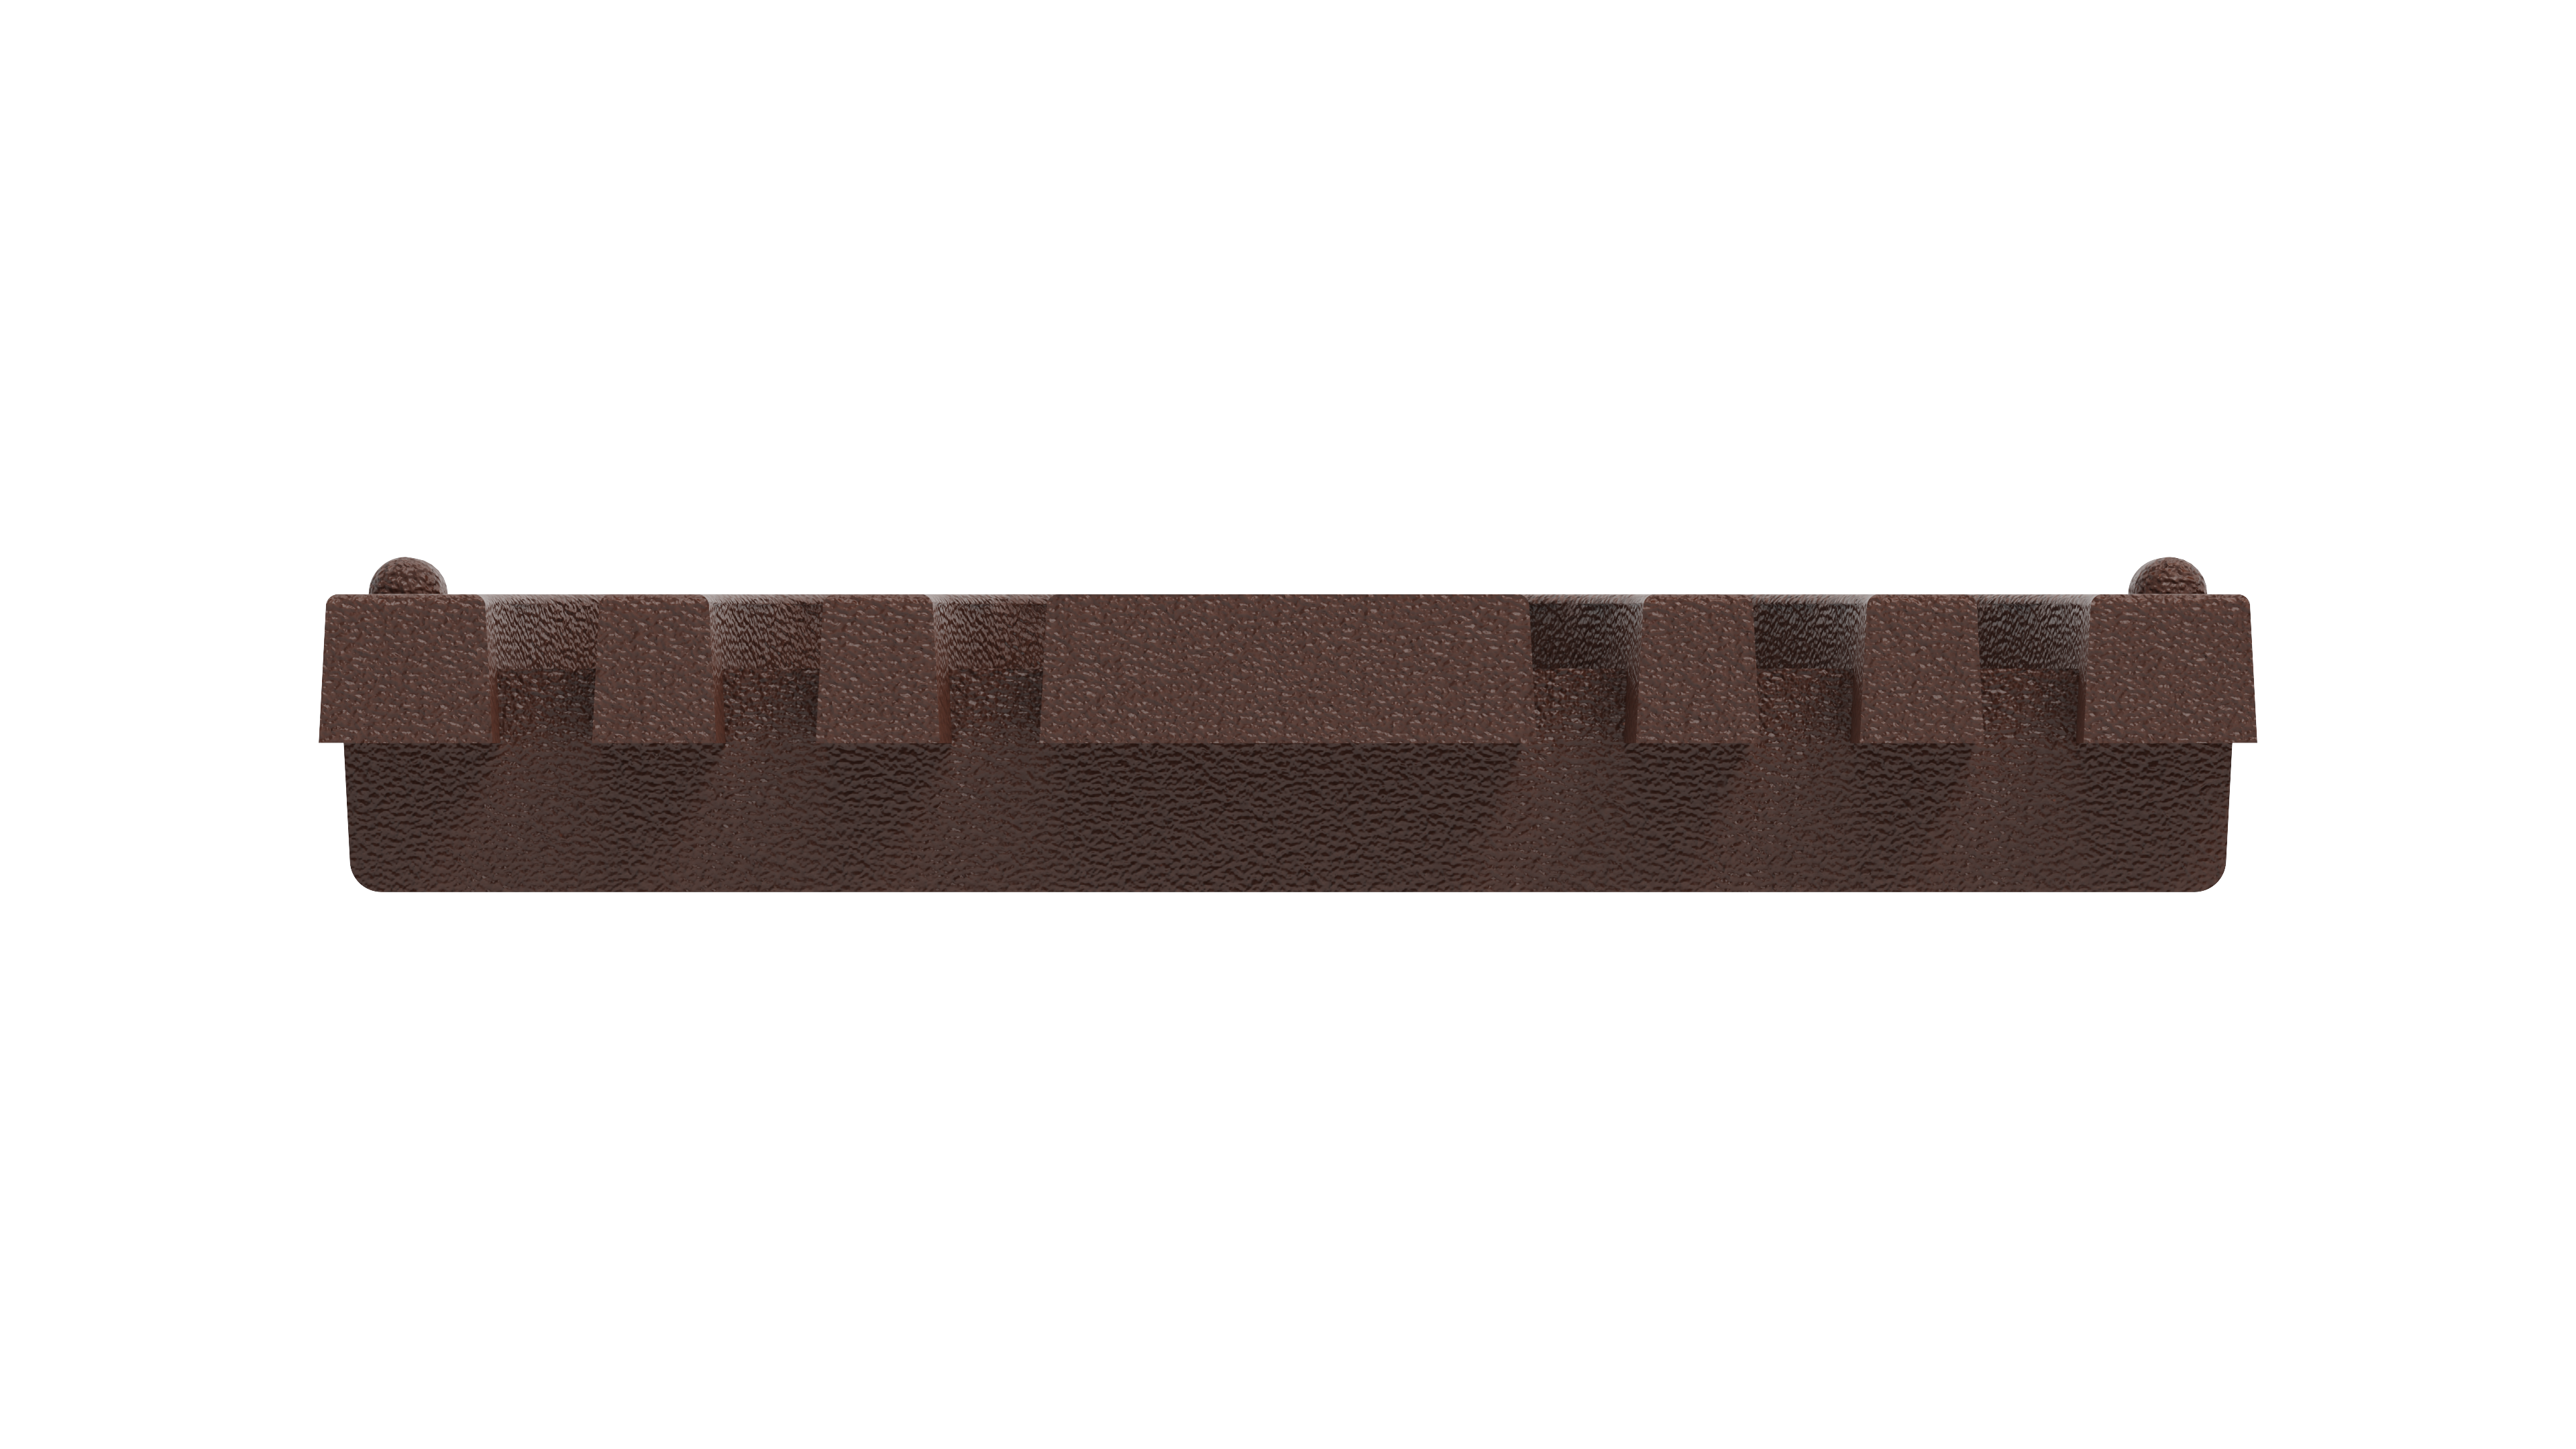 End view of 5x24 rendered grate